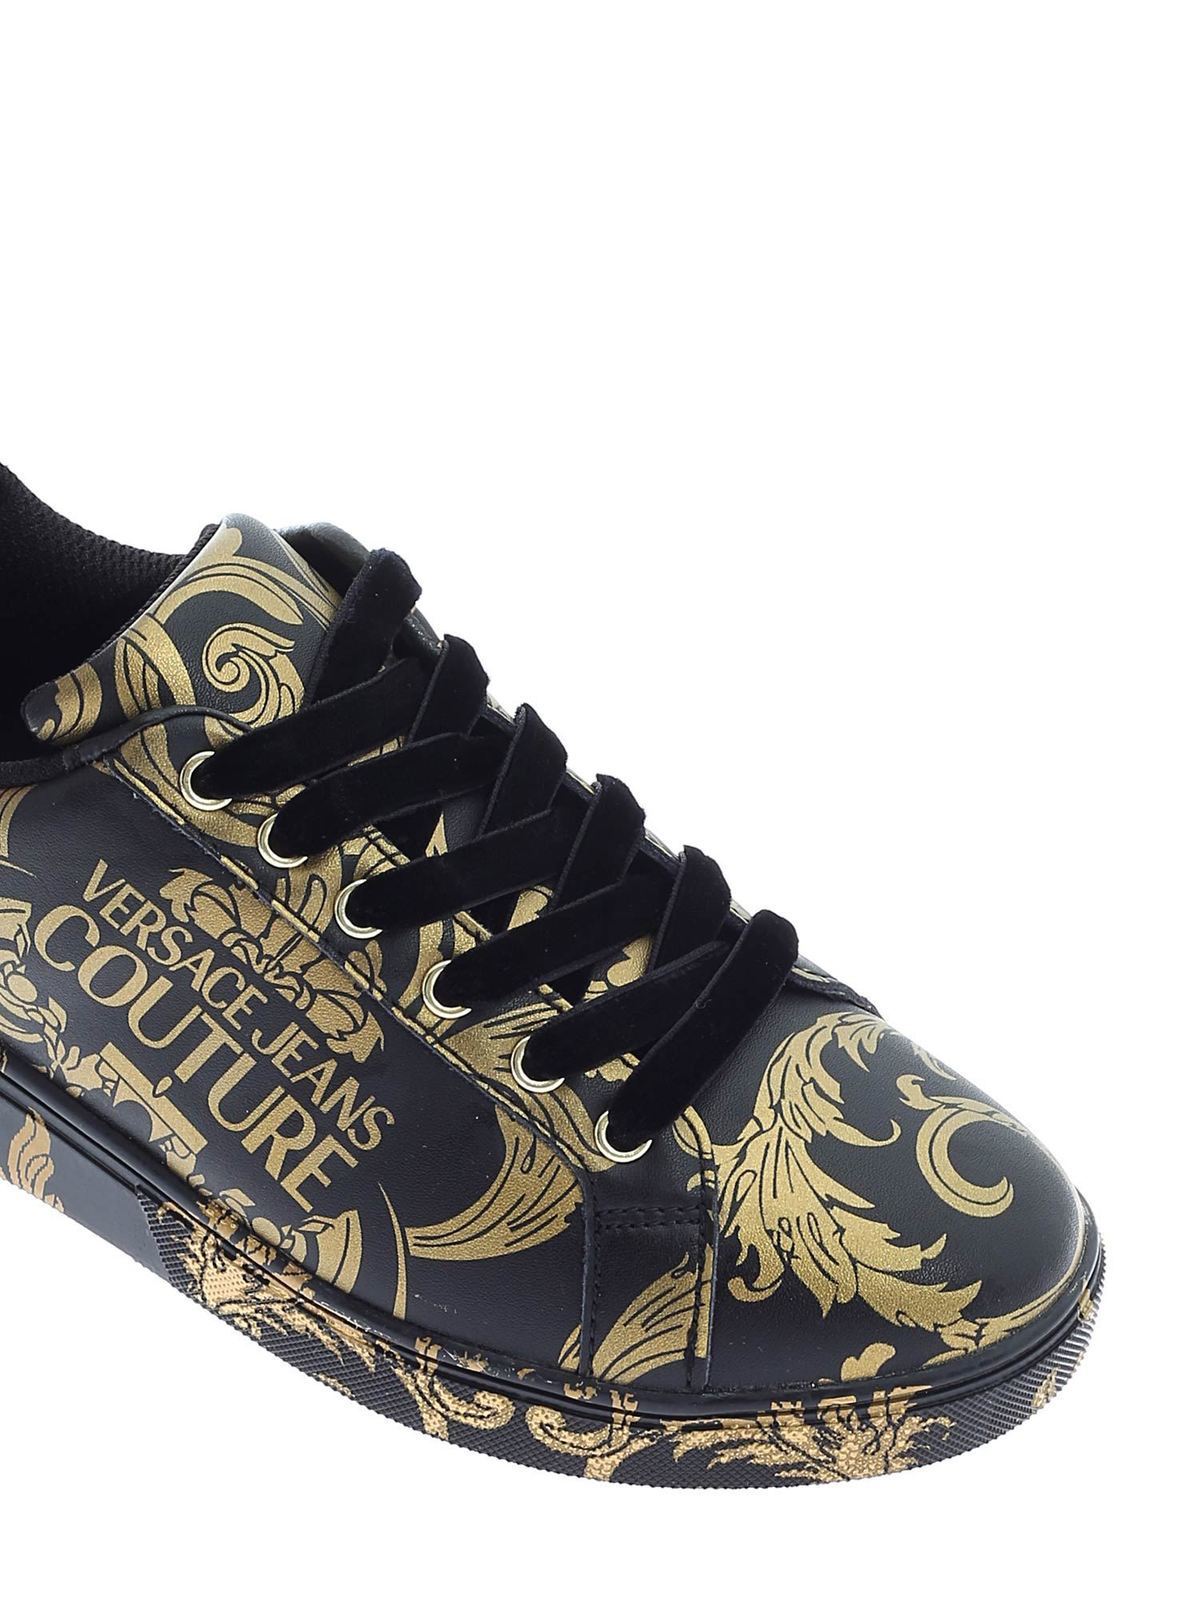 versace sneakers black and gold